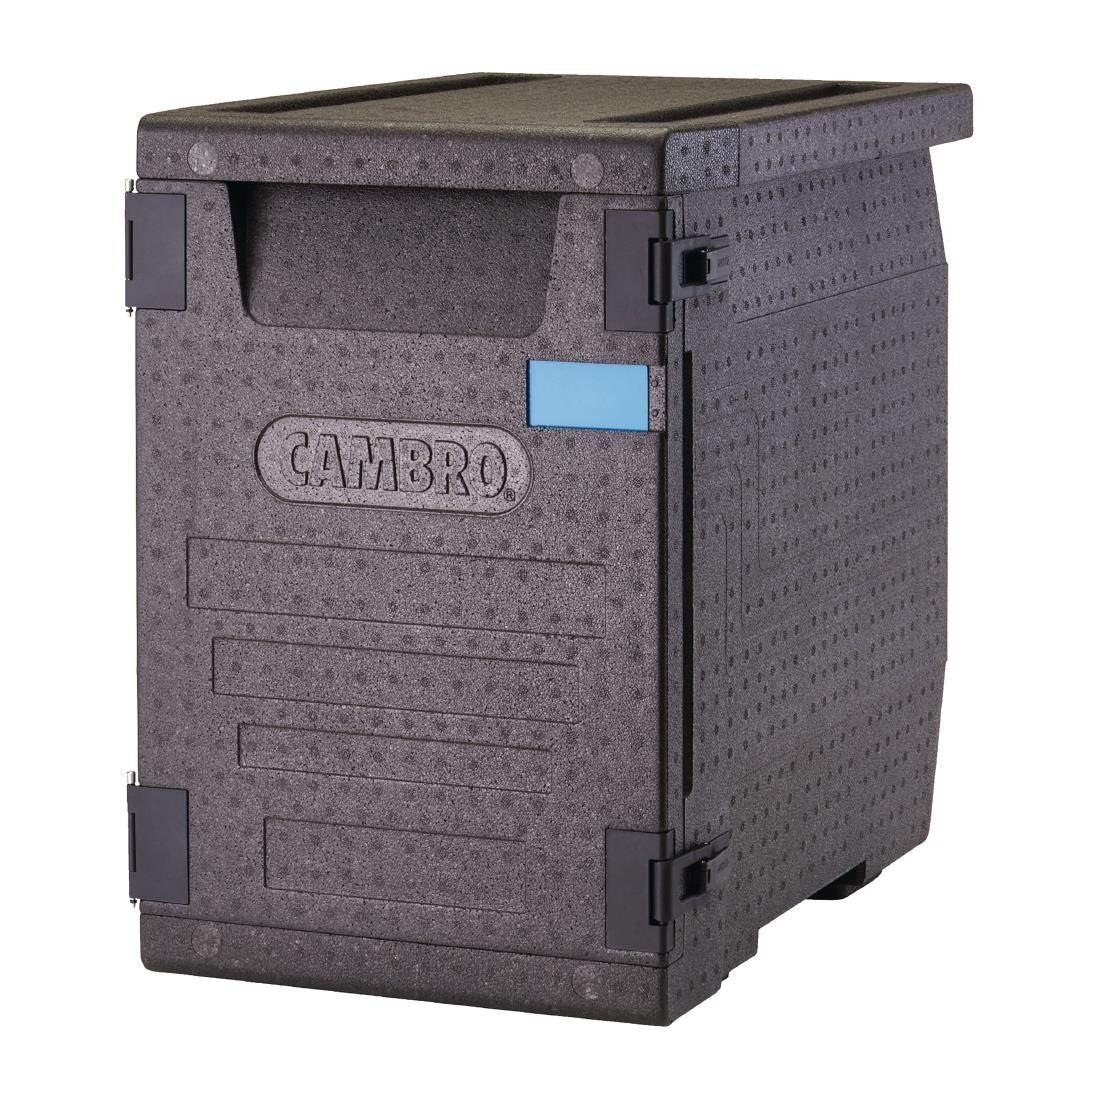 Cambro Insulated Front Loading Food Pan Carrier 86 Litre JD Catering Equipment Solutions Ltd